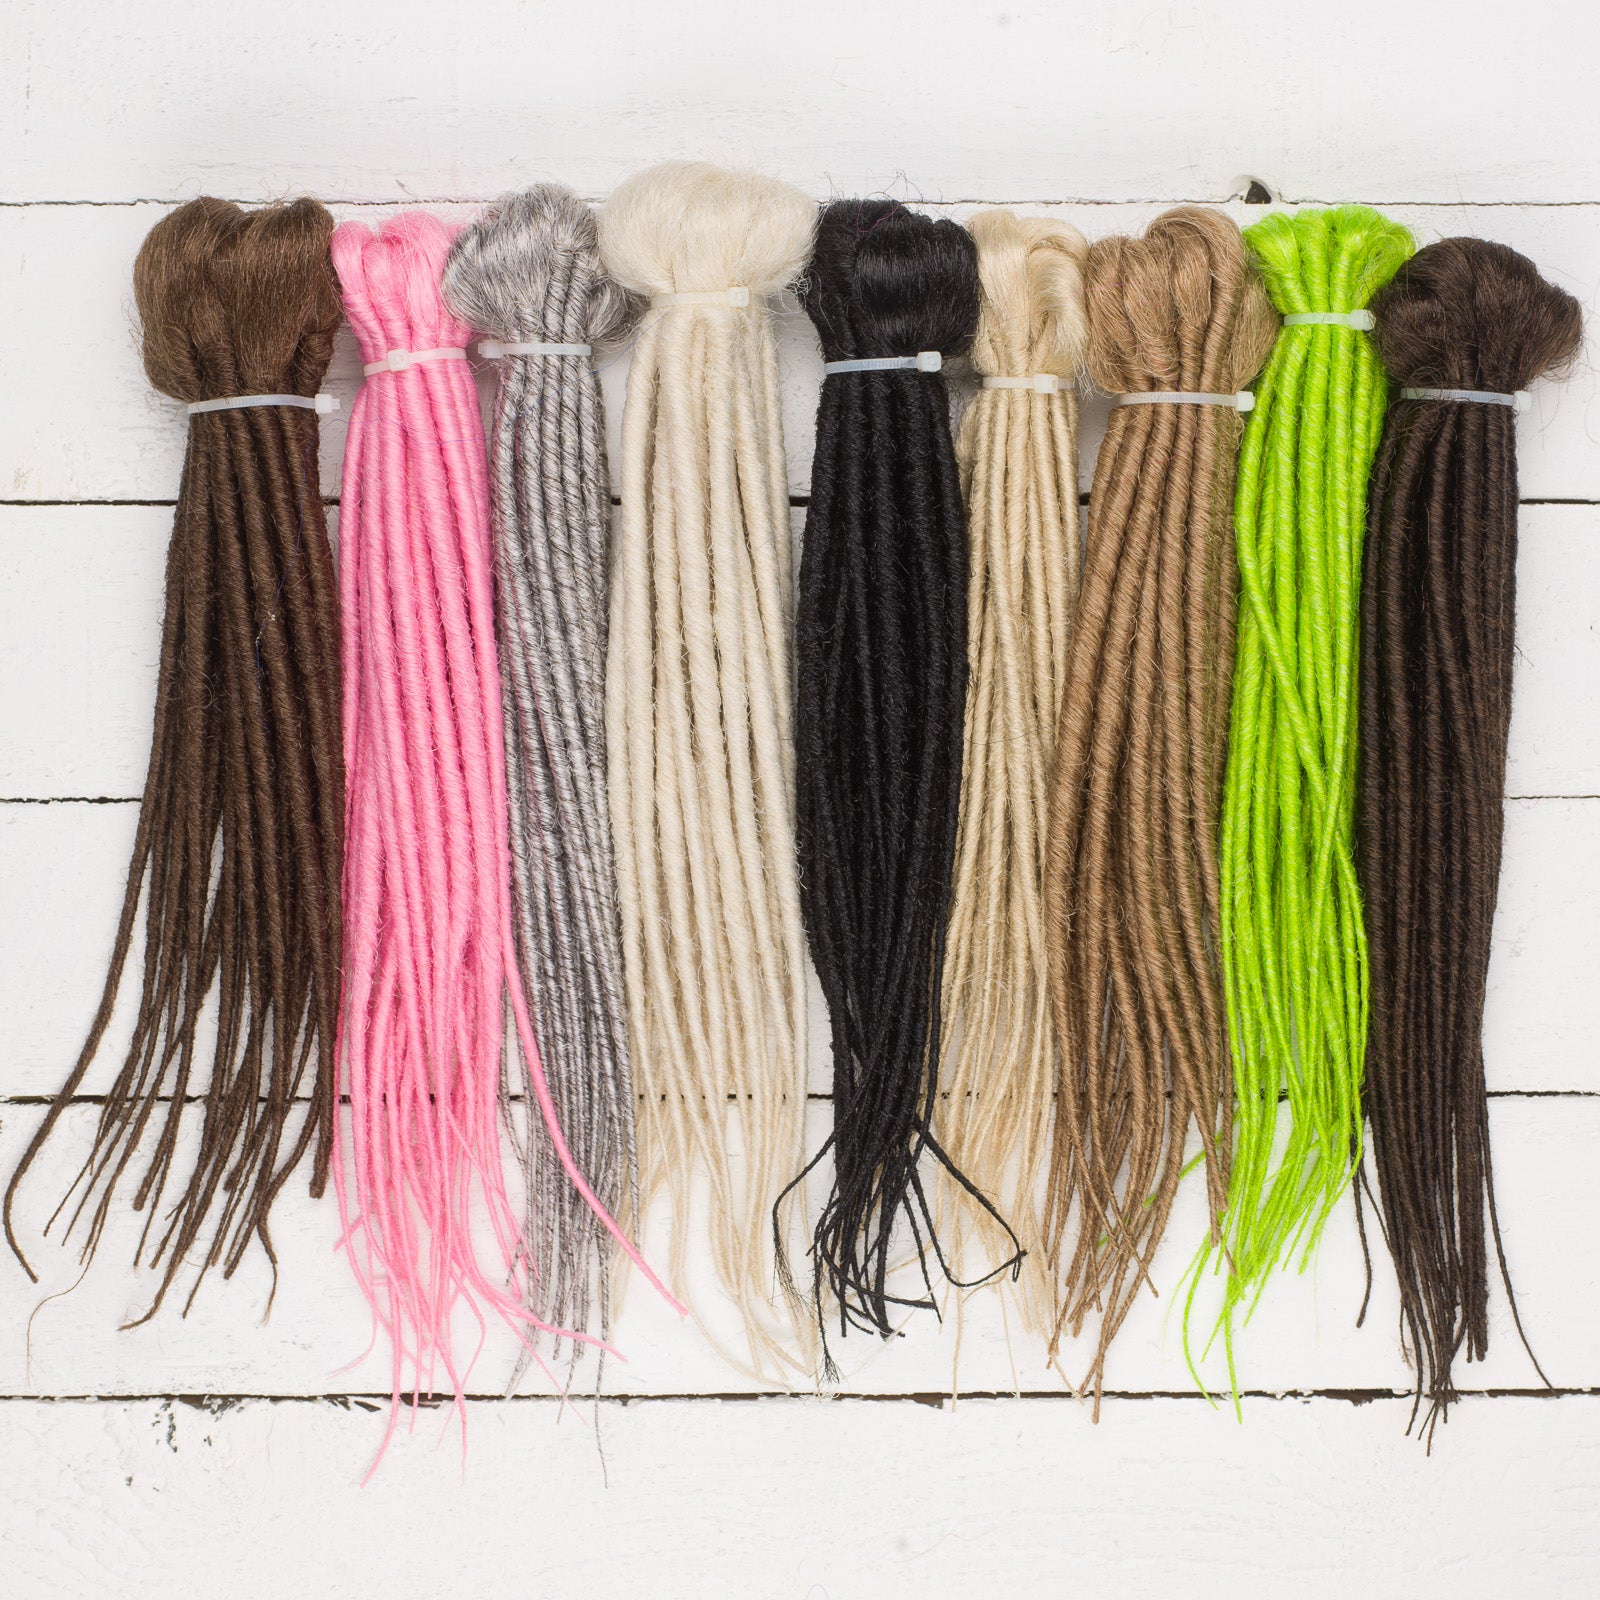 DreadLab -  Short Double Ended Synthetic Dreadlocks (Full Head Kit) Backcombed Extensions